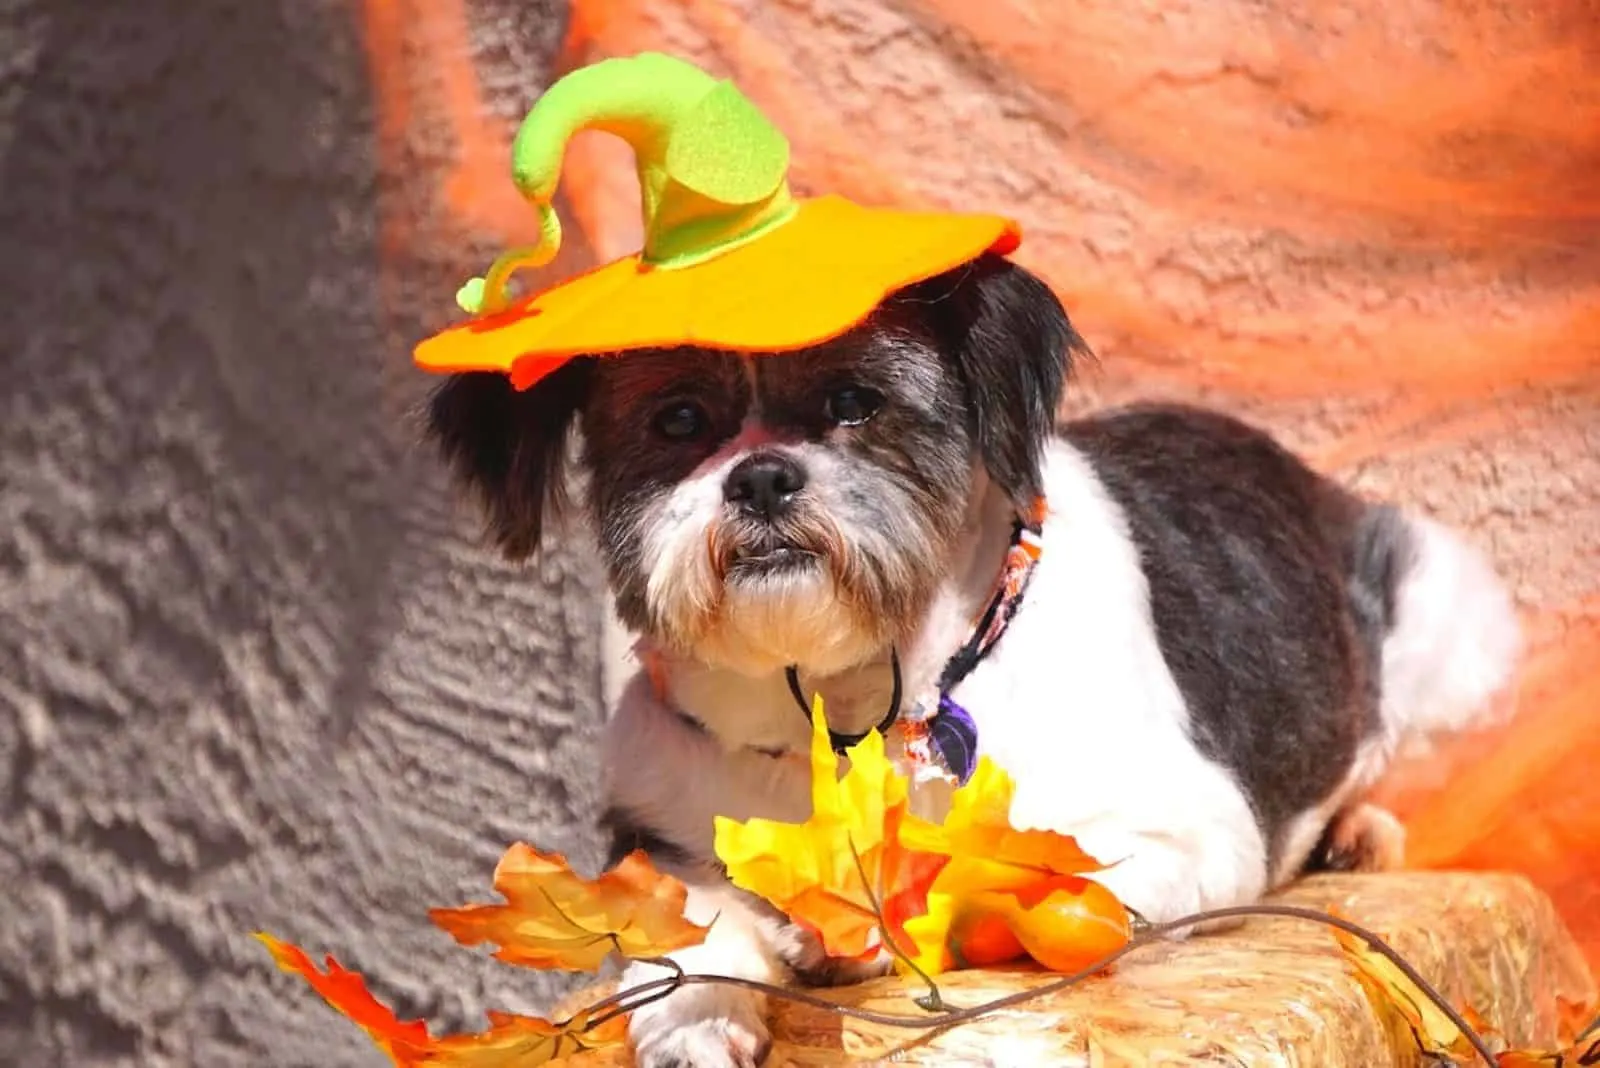 decorated shih tzu dog colored black and white ready for halloween 